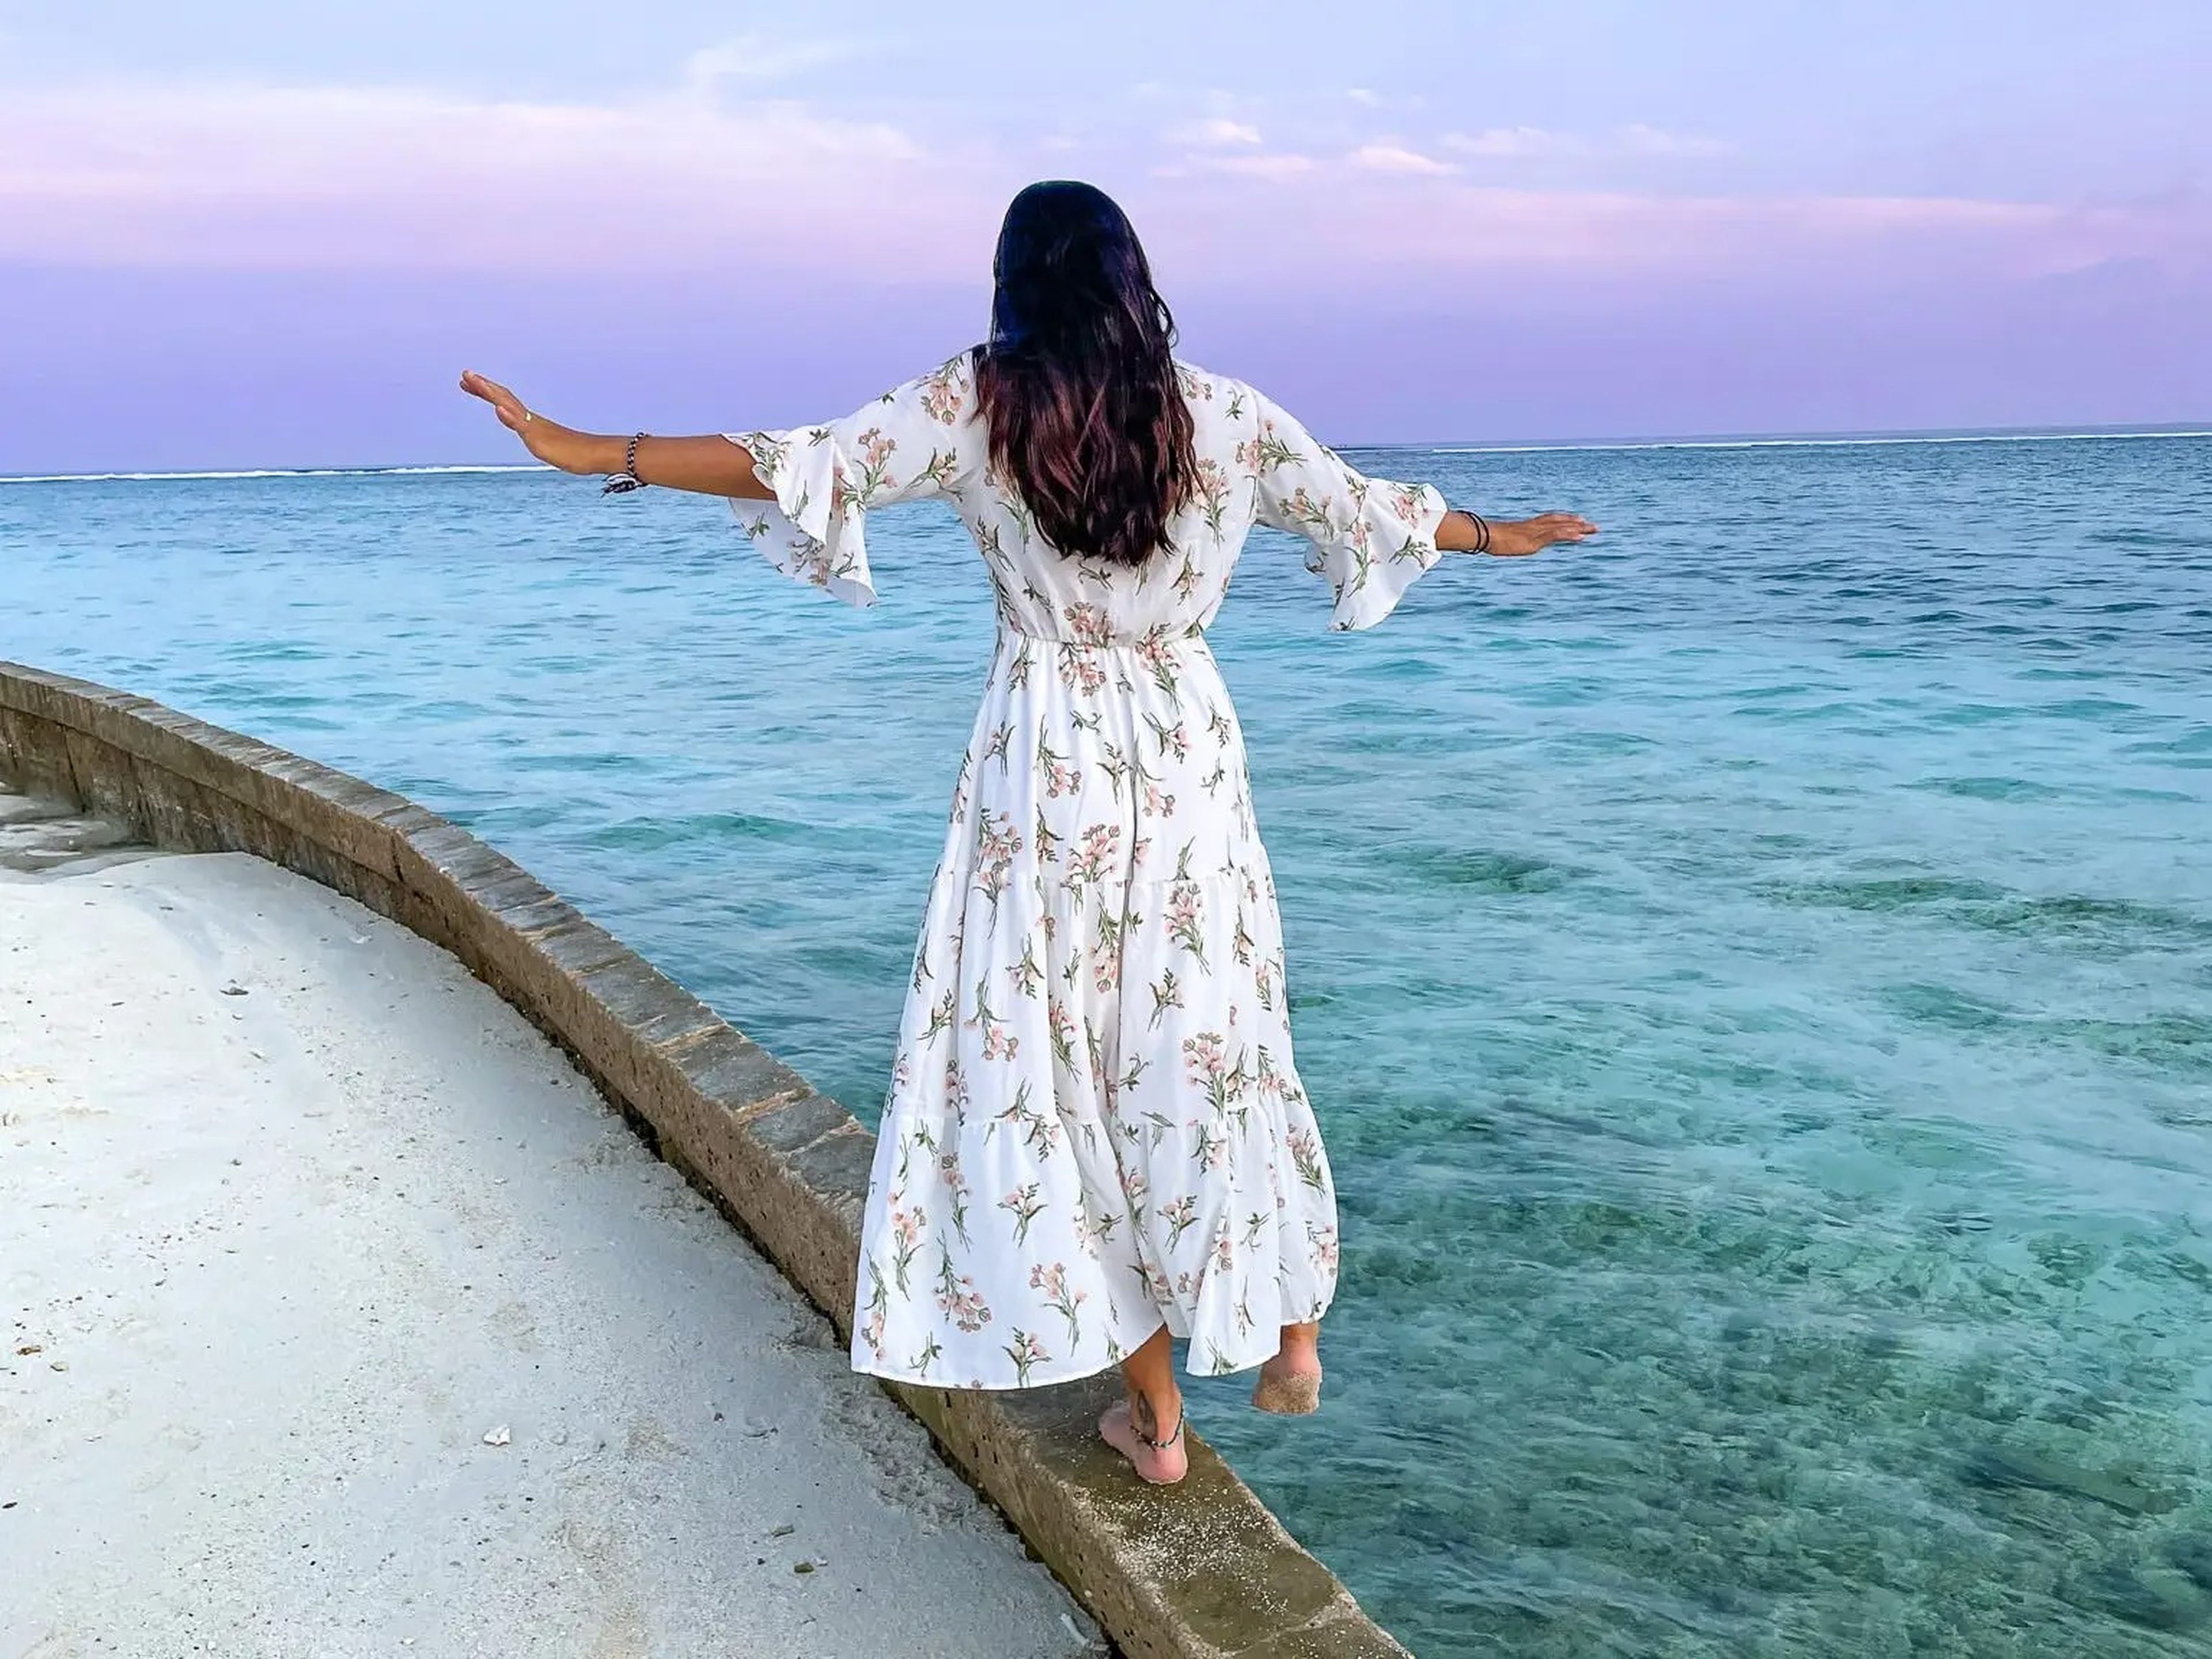 Geena balancing on a curb with her back toward the camera. Her foot is hanging over the turquoise water and the sky is different shades of purple